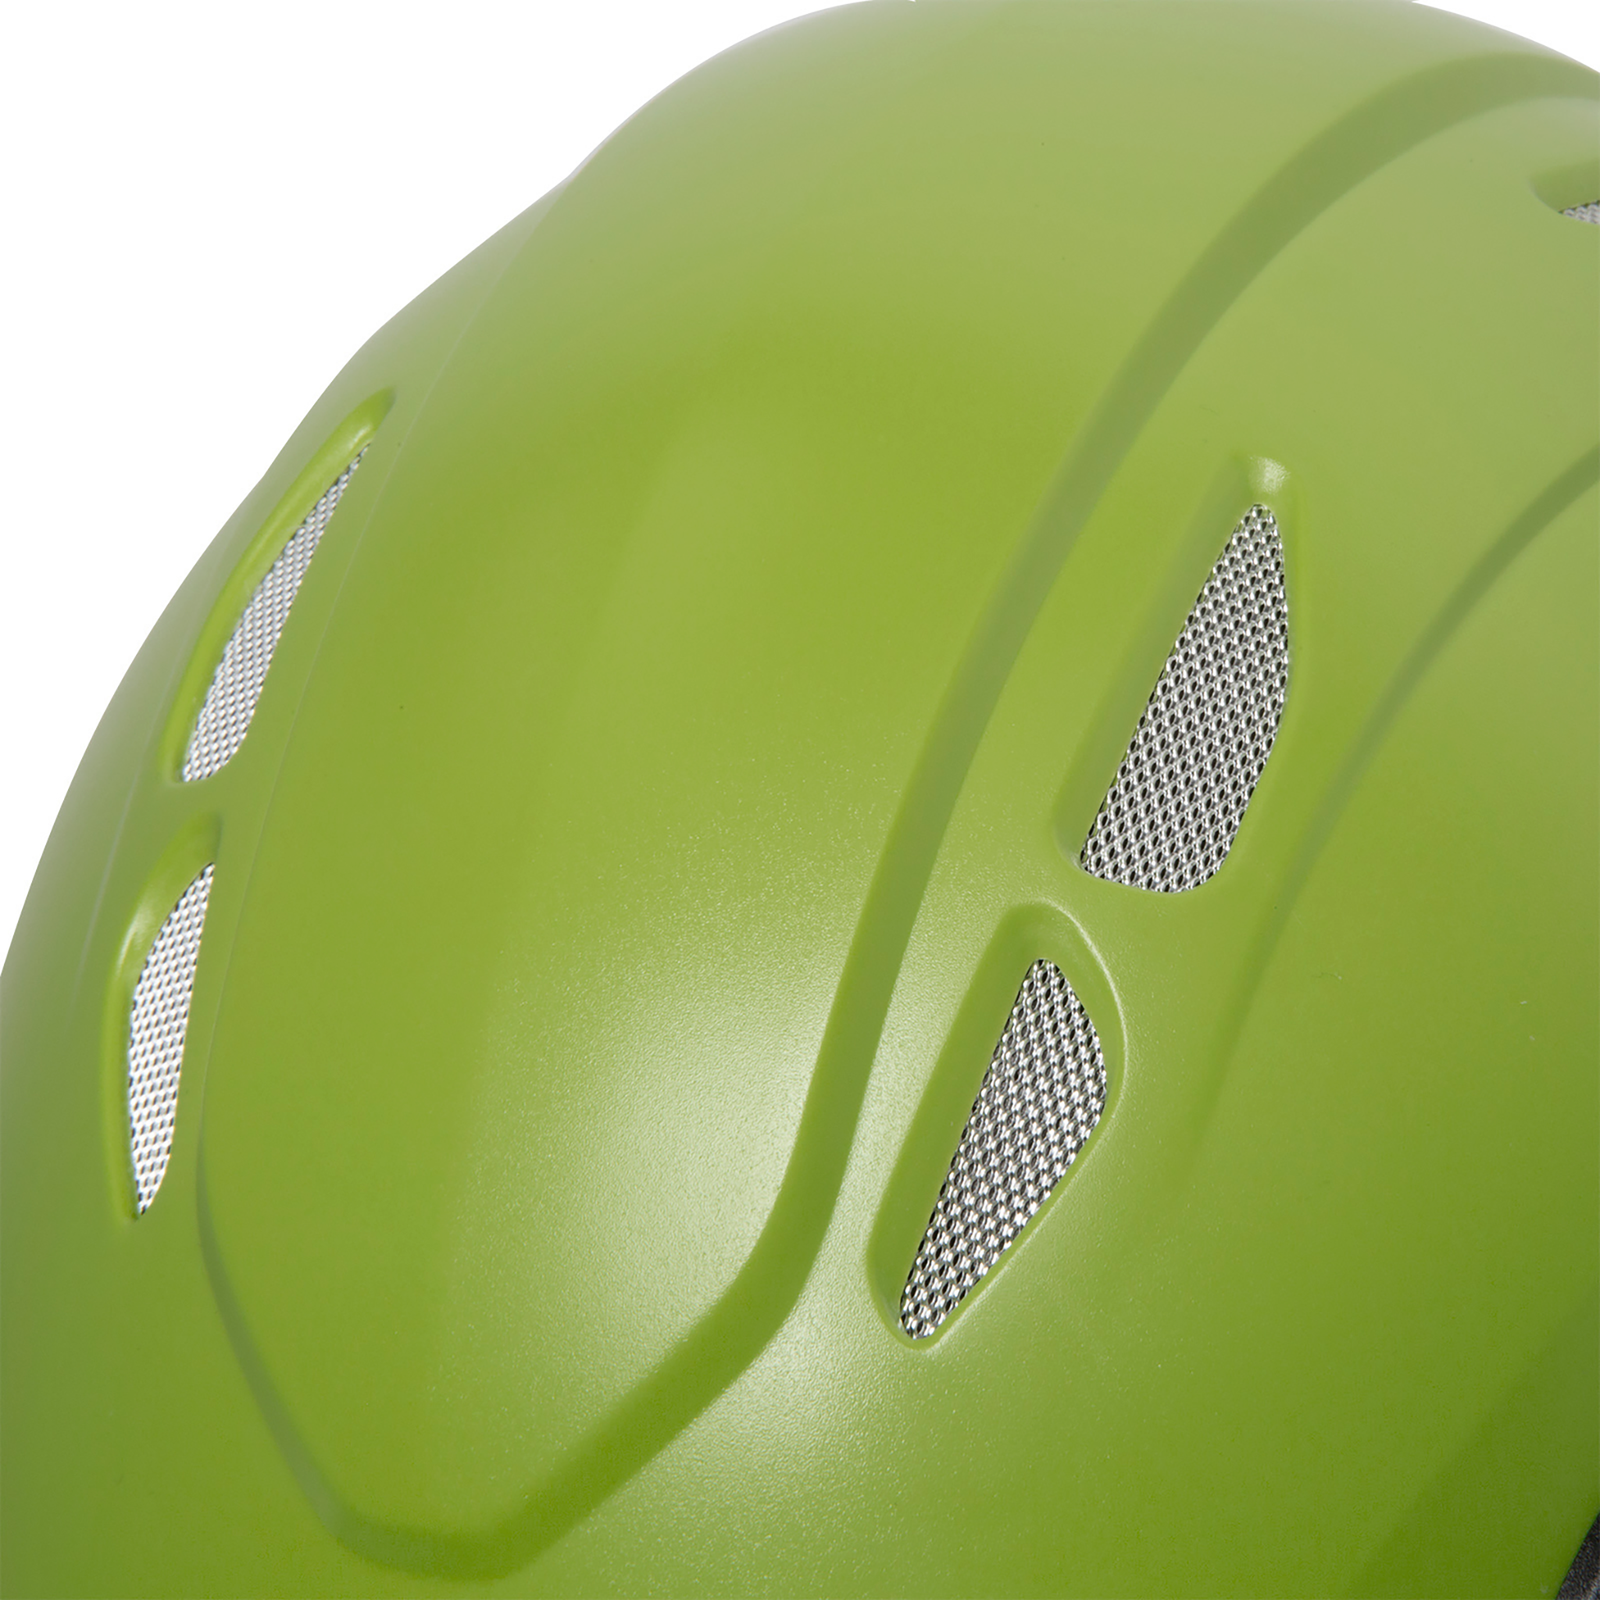 Close up to show the 4 anti-intrusion grilles of the JORESTECH climbing hat and the heavy duty ABS outer shell